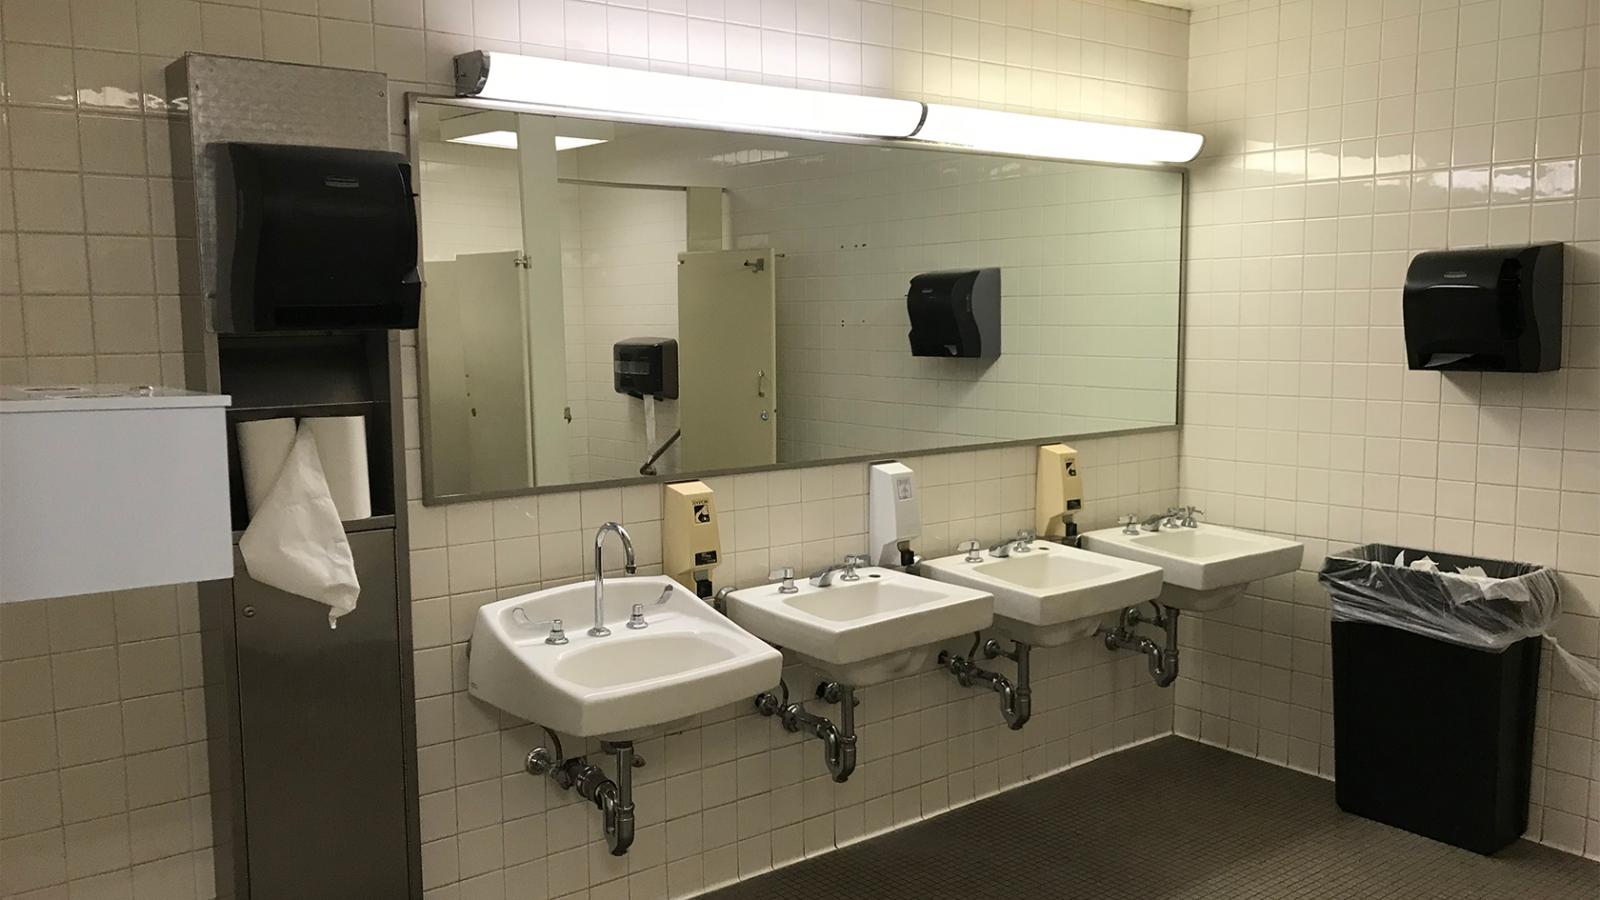 Restrooms at Arko Travel Centers of America